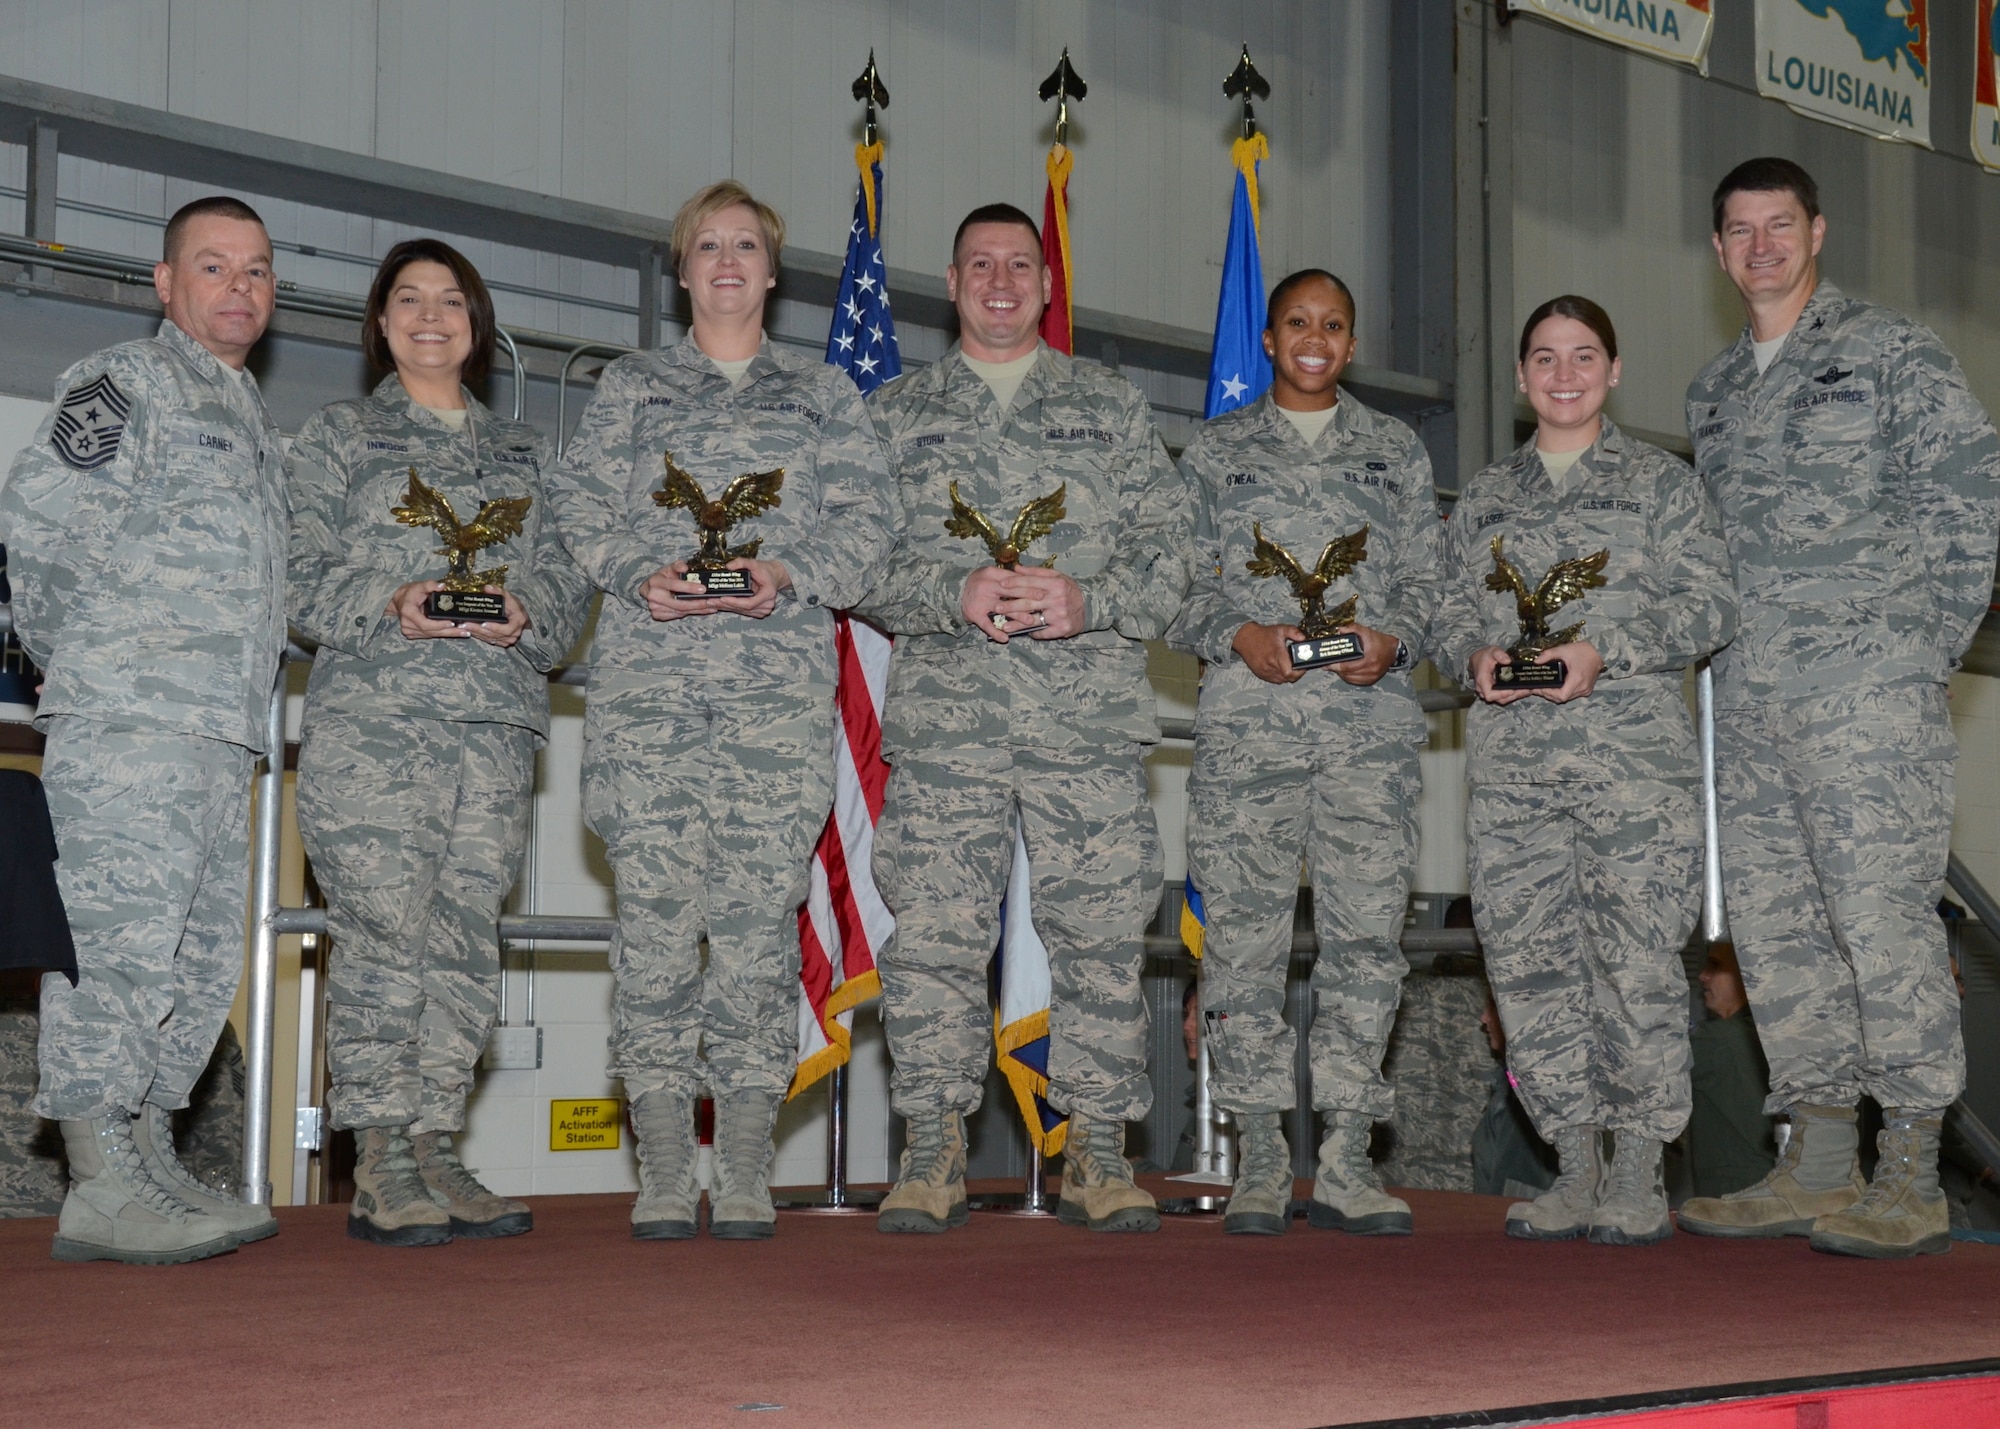 131st Bomb Wing Outstanding Airmen of the Year Awards were presented by the 131st BW commander at the End-of-Year All-Call during December UTA at Whiteman Air Force Base, Mo., Dec. 7, 2014.

Pictured left to right are Chief Master Sgt. Paul Carney, 131st BW Command Chief; 1st Sgt. of the Year Master Sgt. Kirsten Inwood, 131st Medical Group; Senior NCO of the Year Master Sgt. Melissa Lakin, 131st BW Recruiting; NCO of the Year Tech. Sgt. Matt Storm, 131st MDG; Airman of the Year Staff Sgt. Brittany O'Neal, 131st BW Recruiting; Company Grade Officer of the Year 2nd Lt. Ashley Blaser, 157th Air Operations Group; and Col. Michael Francis, 131st BW commander.  Not pictured is Field Grade Officer of the Year Maj. Luke Jayne, 131st Operations Group.

(U.S. Air National Guard photo by Airman 1st Class Halley Burgess)